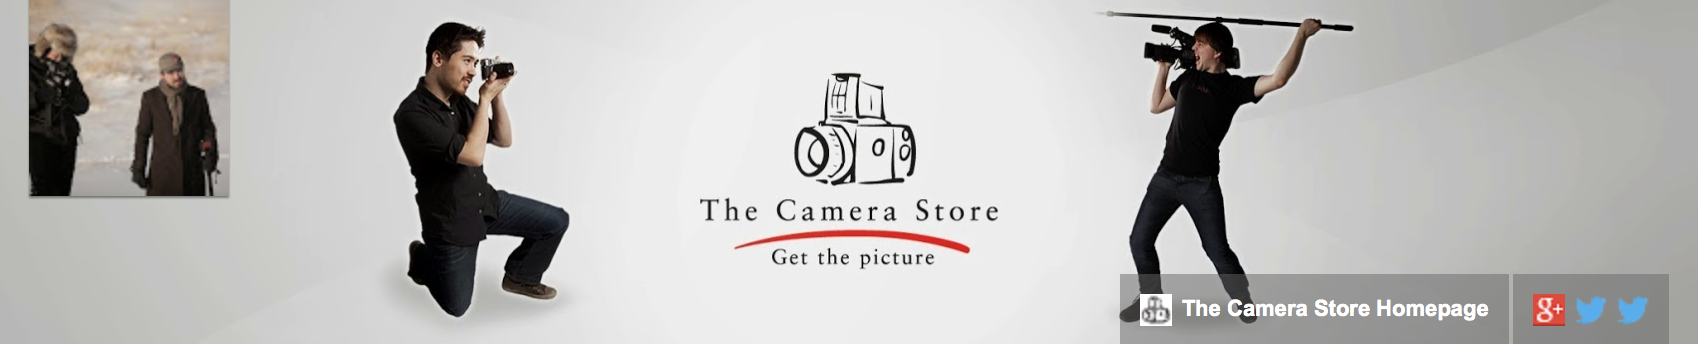 List of Most Popular Photography YouTube Channels camera store tv